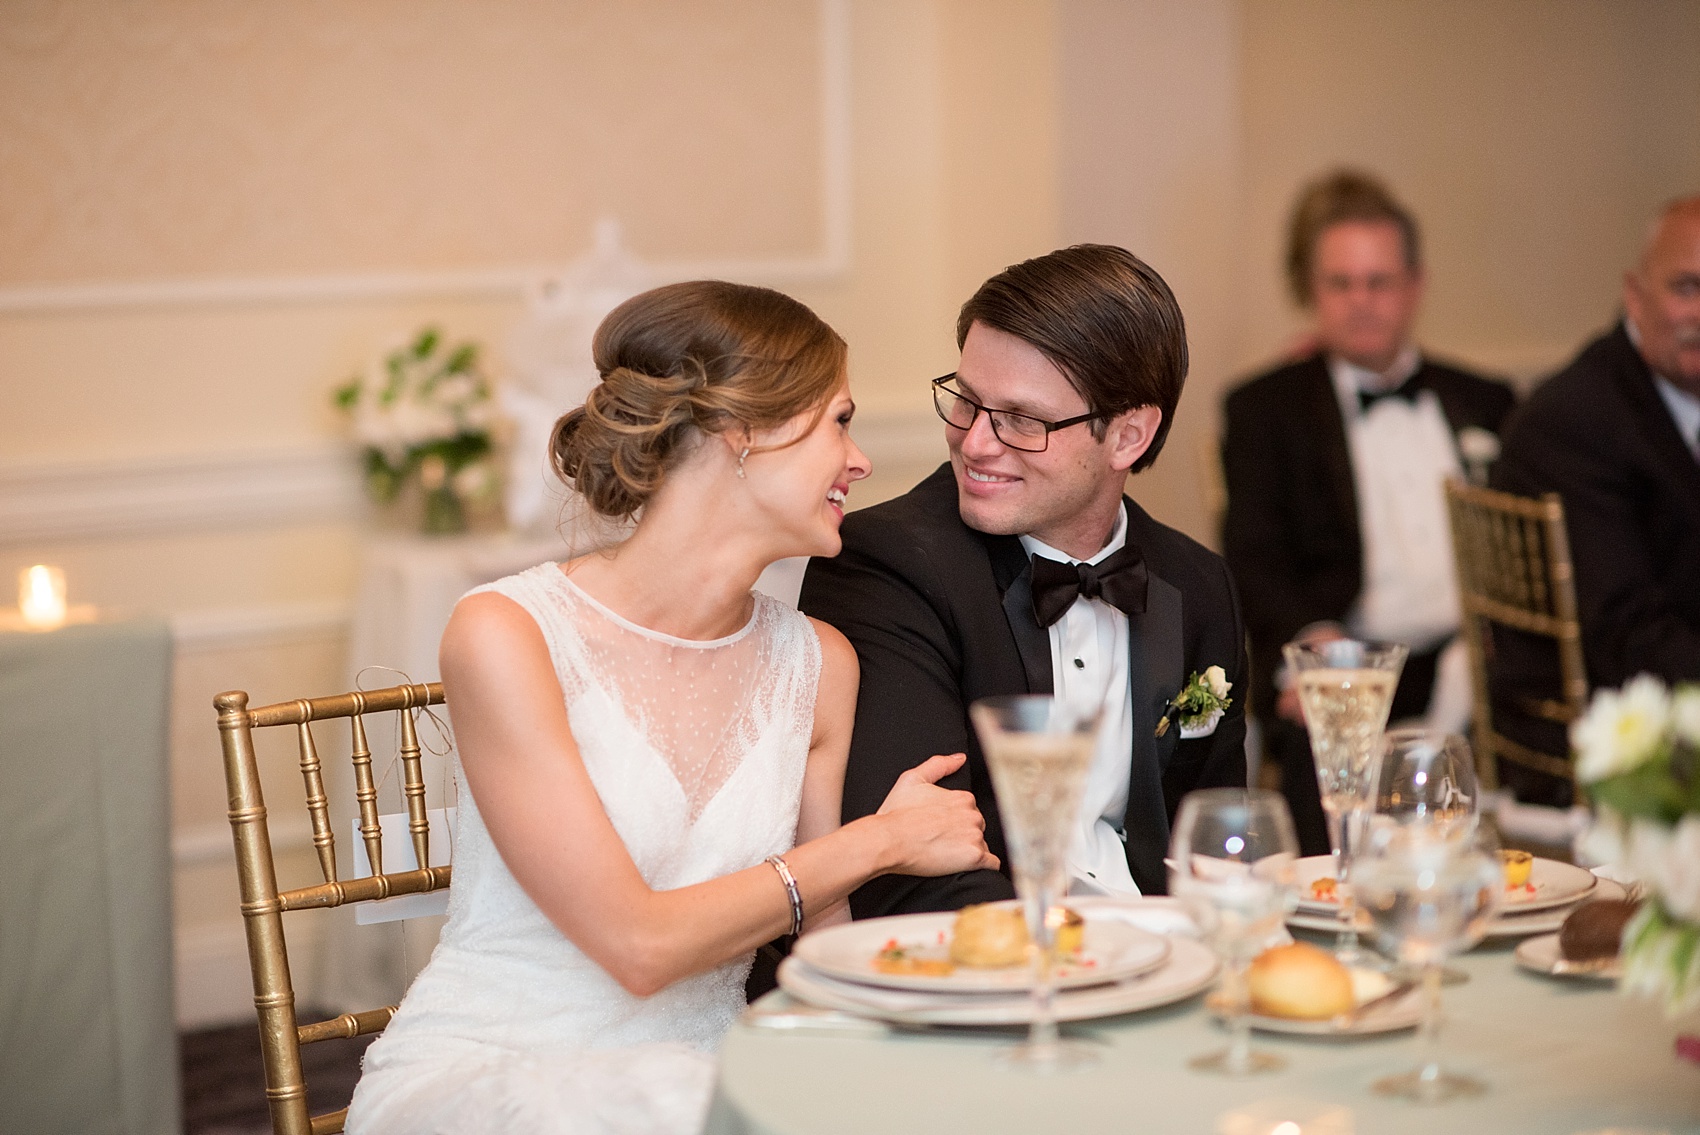 Pearl River Hilton wedding party photos. Images by Mikkel Paige Photography, NYC wedding photographer.